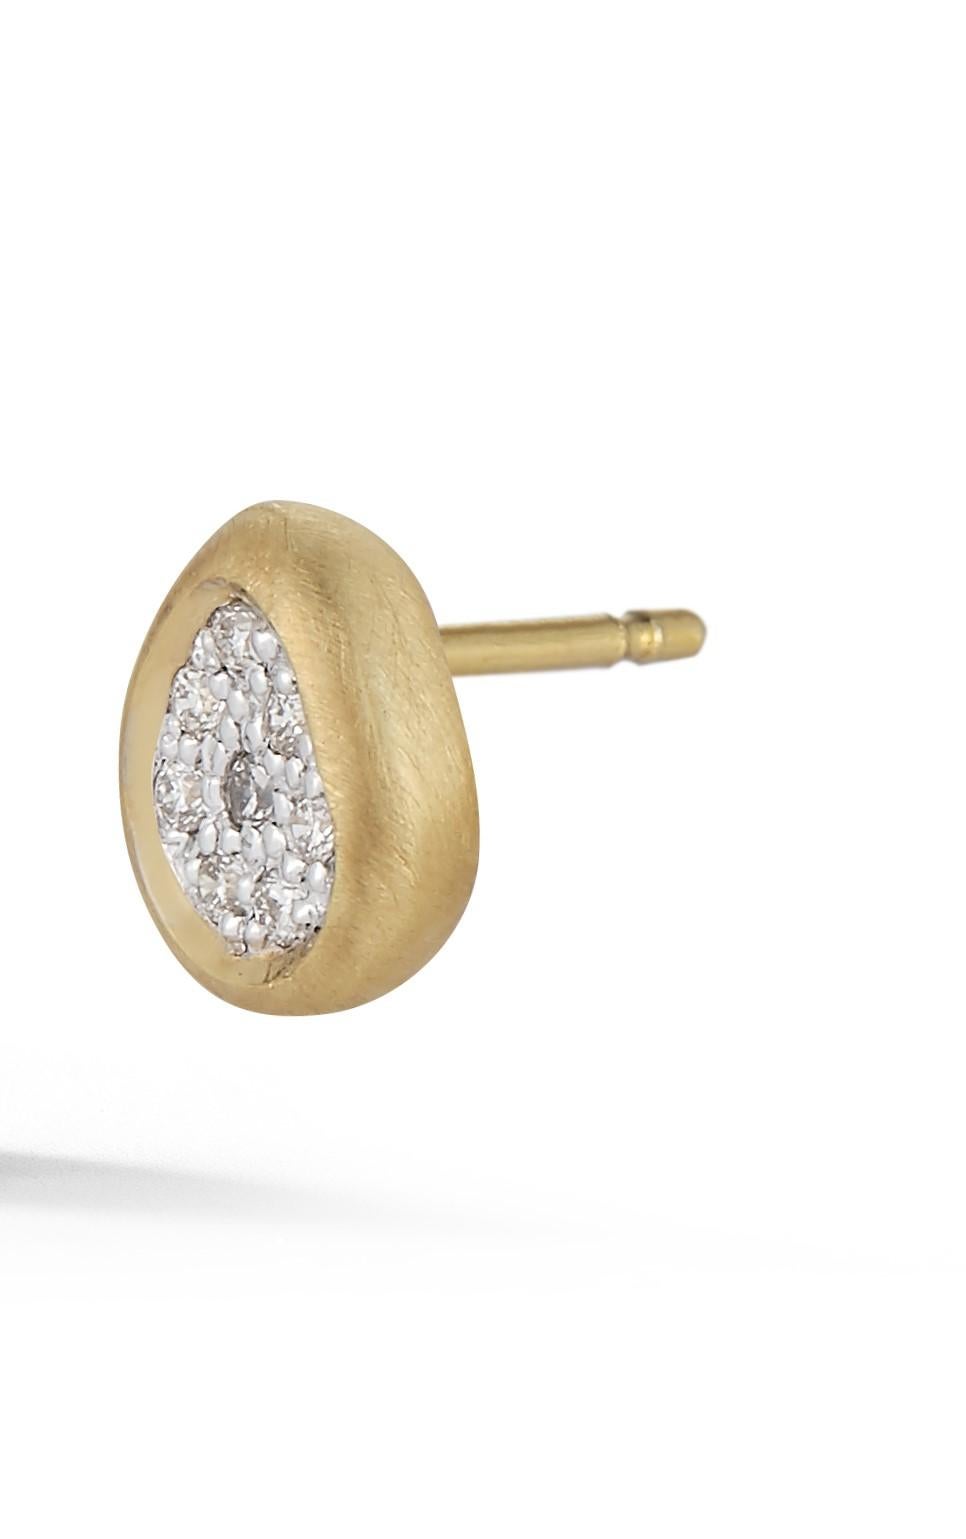 14 Karat Yellow Gold Hand-Crafted Matte-Finished Free-Form Stud Earrings, Enhanced with 0.17 Carats of Pave Set Diamonds.  
